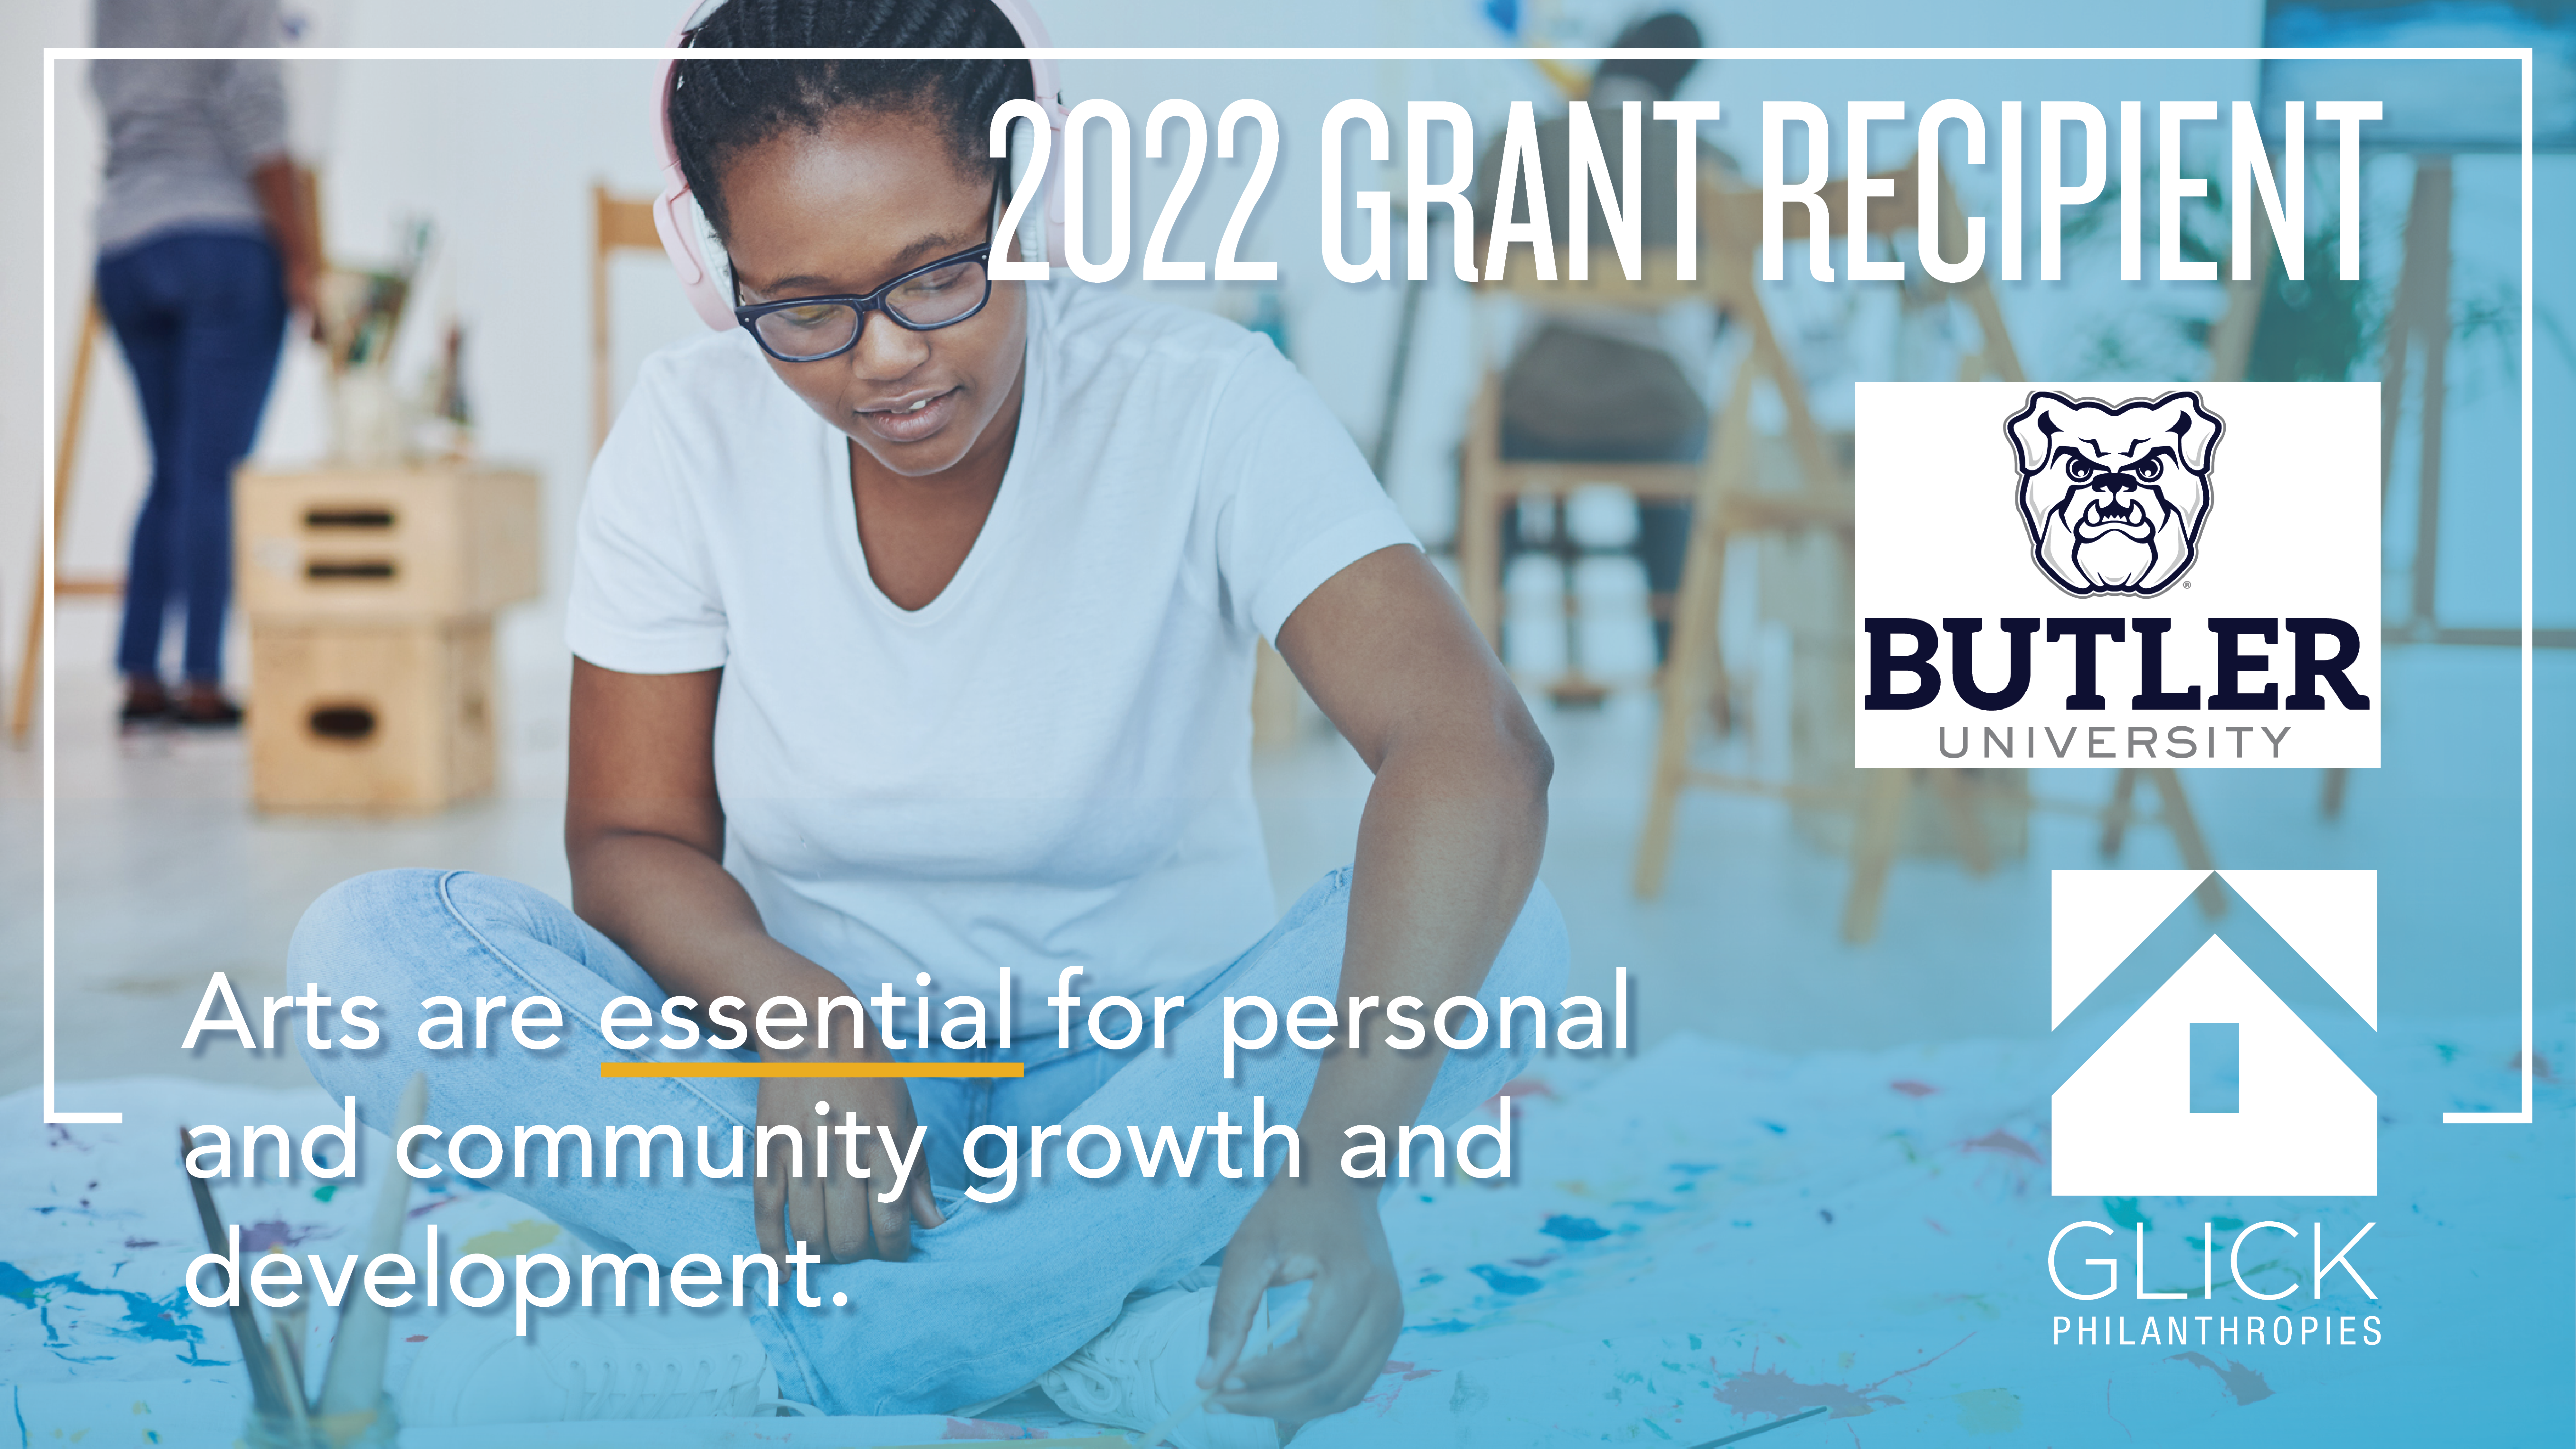 Image indicating Butler University as a 2022 Grant Recipient from the Glick Fund, image features the text &quot;arts are essential for personal and community growth and development.&quot;